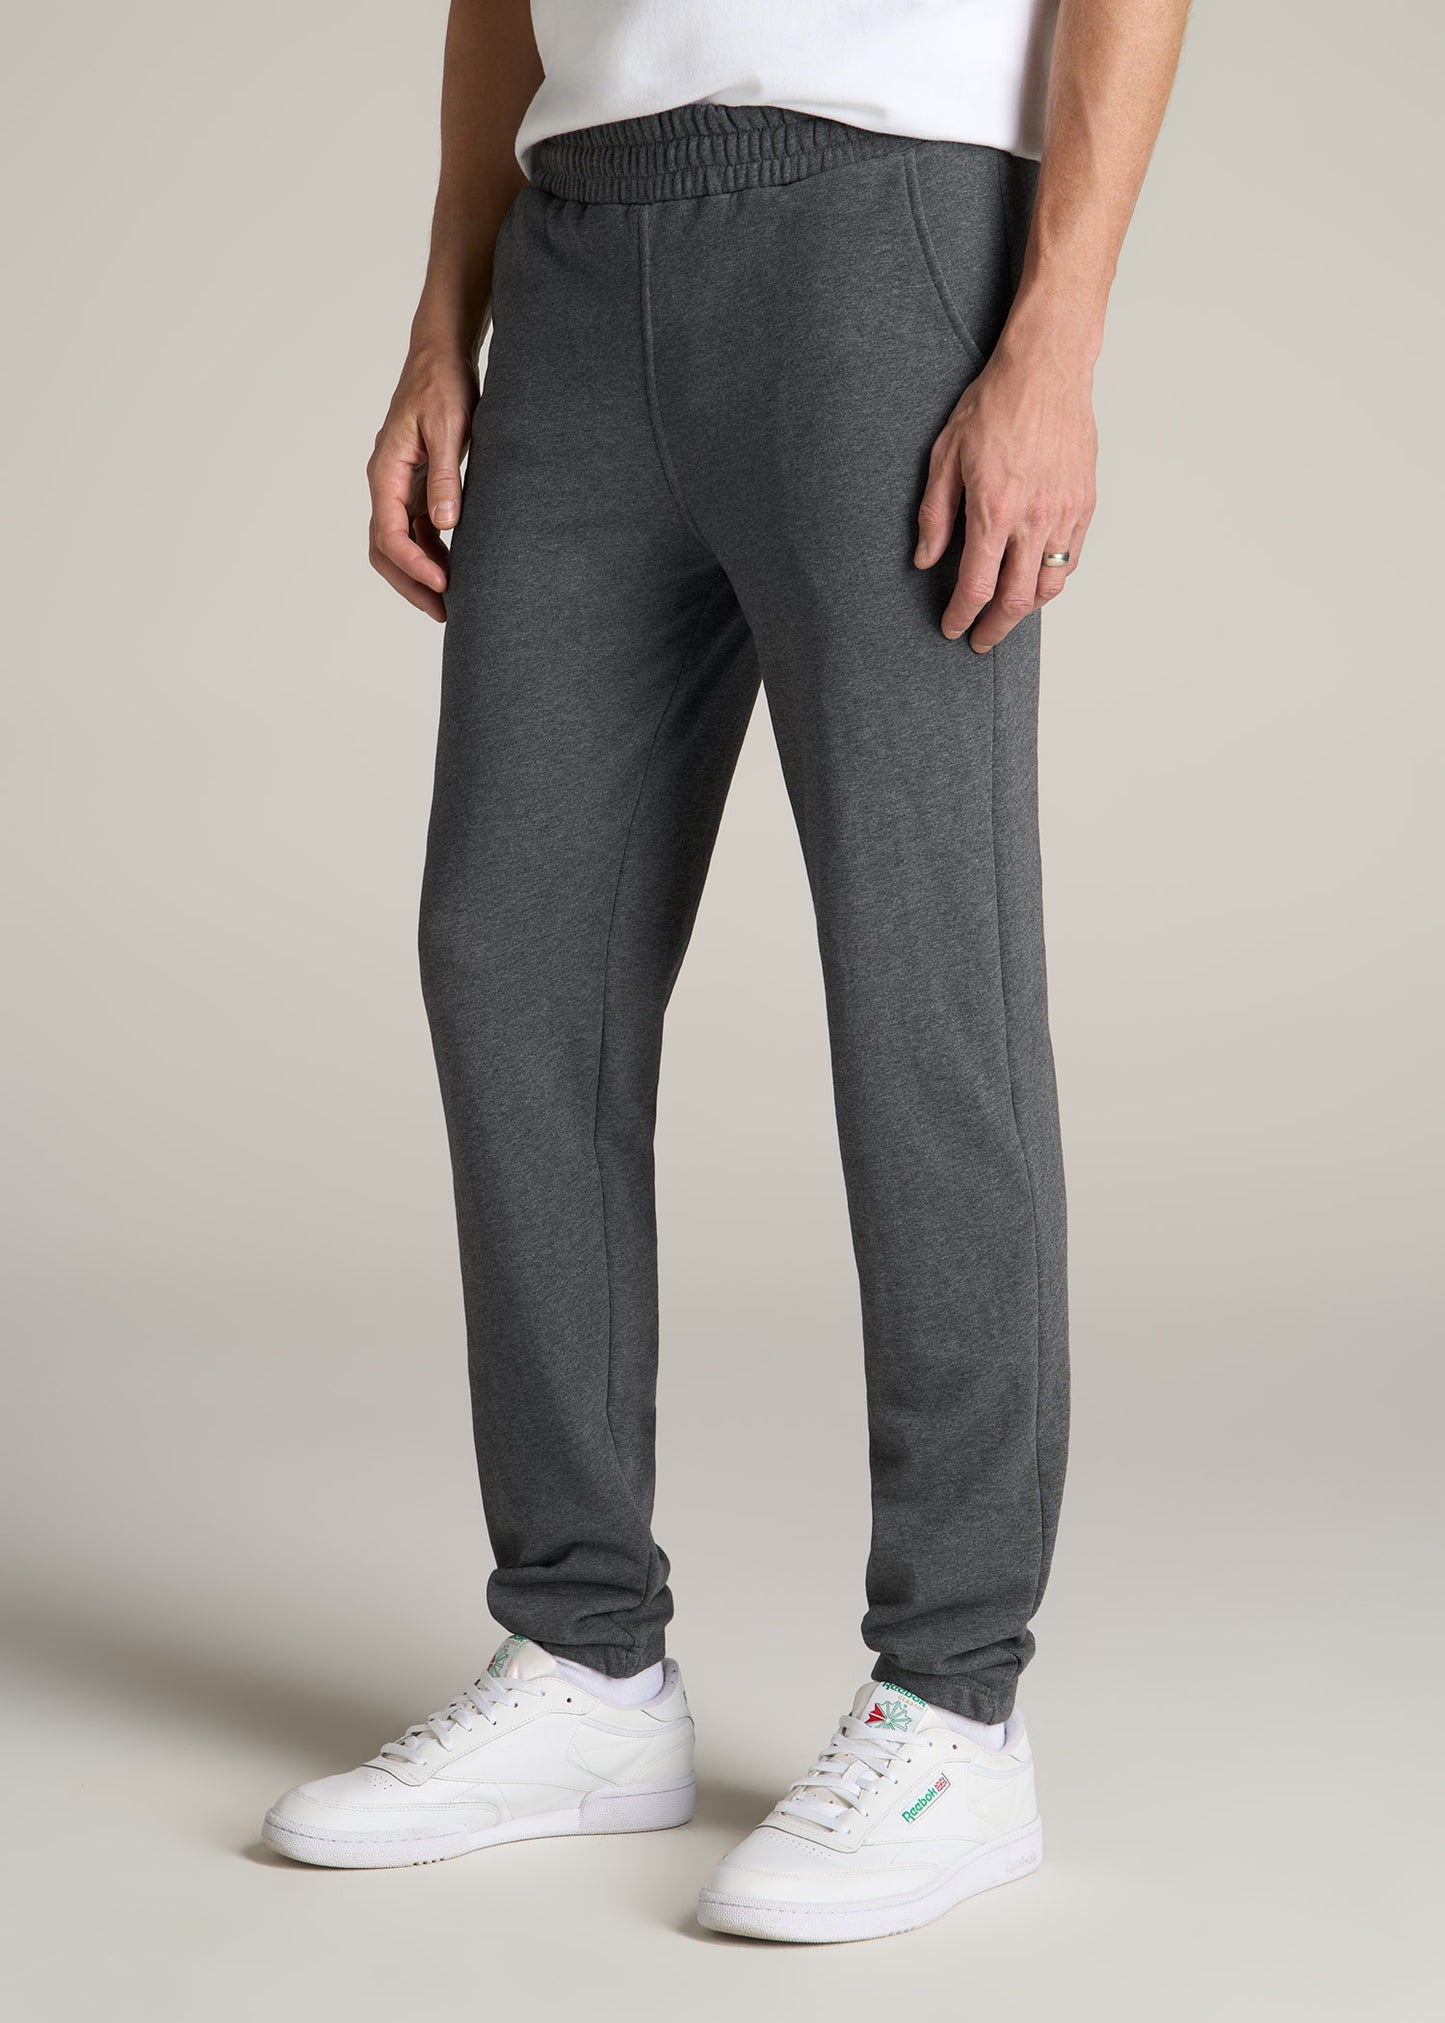 A tall man wearing American Tall's Wearever French Terry Sweatpants for Tall Men in Charcoal Mix